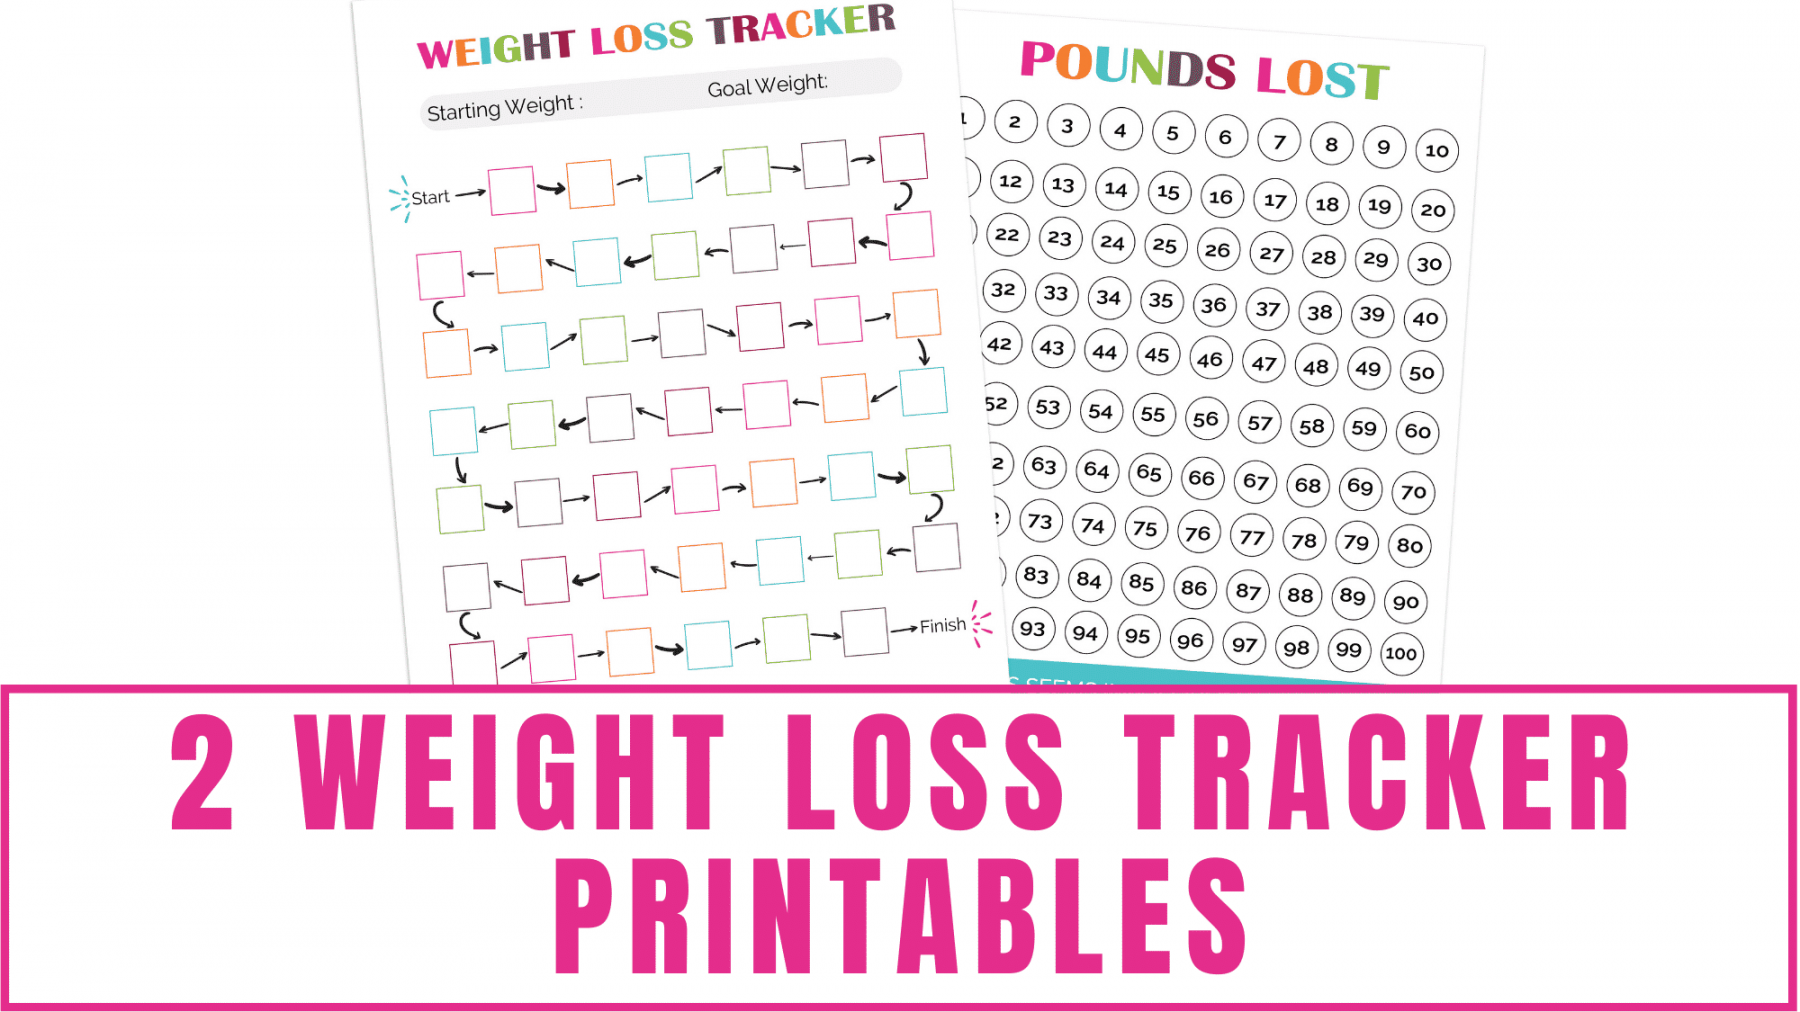 Weight Loss Tracker Printables - Freebie Finding Mom - FREE Printables - Free Weight Loss Chart Printable